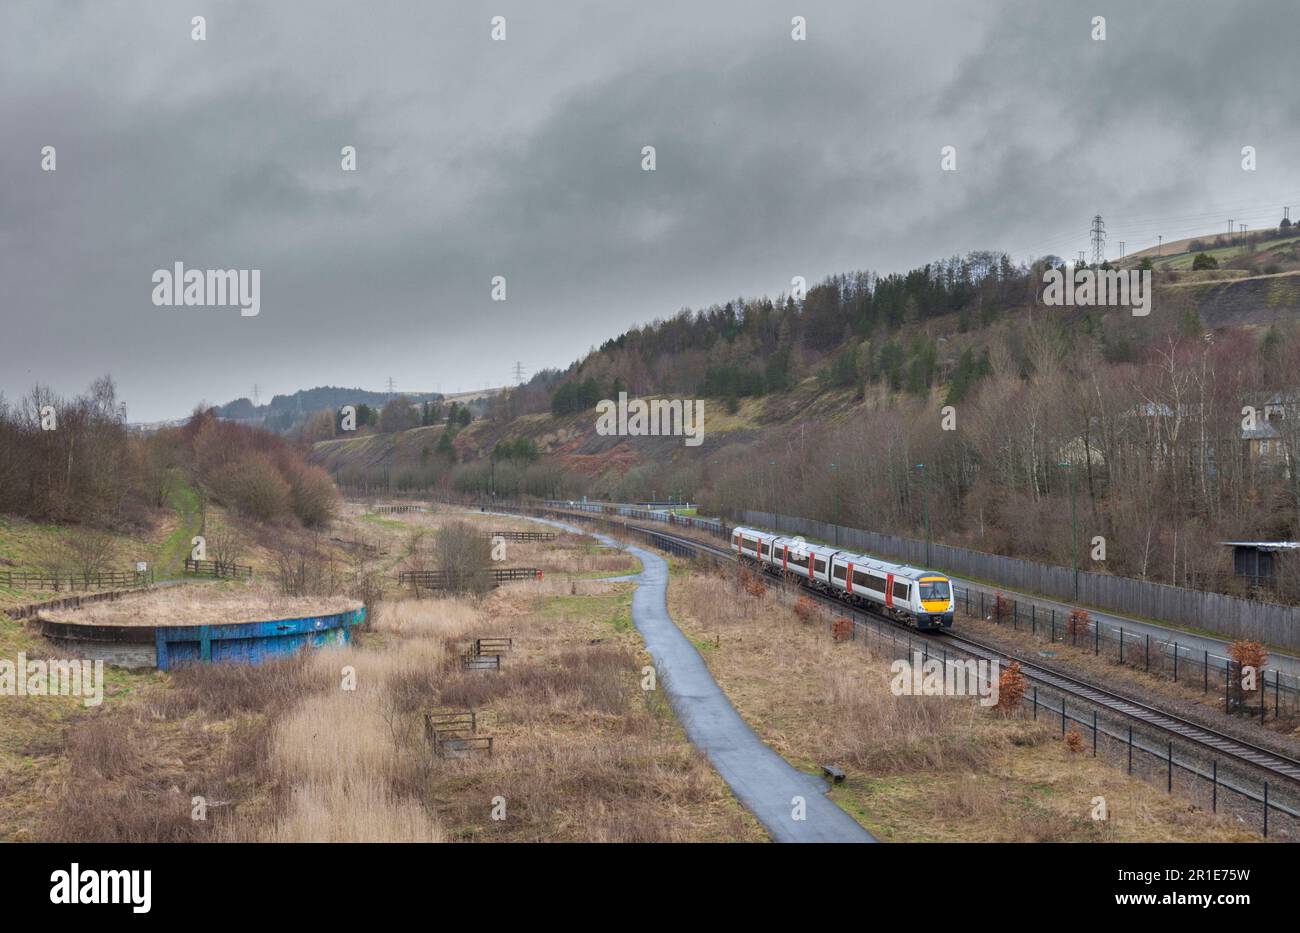 Transport For Wales class 170 Bombardier Turbostar train on the Ebbw Vale line approaching journeys end on the single track line Stock Photo